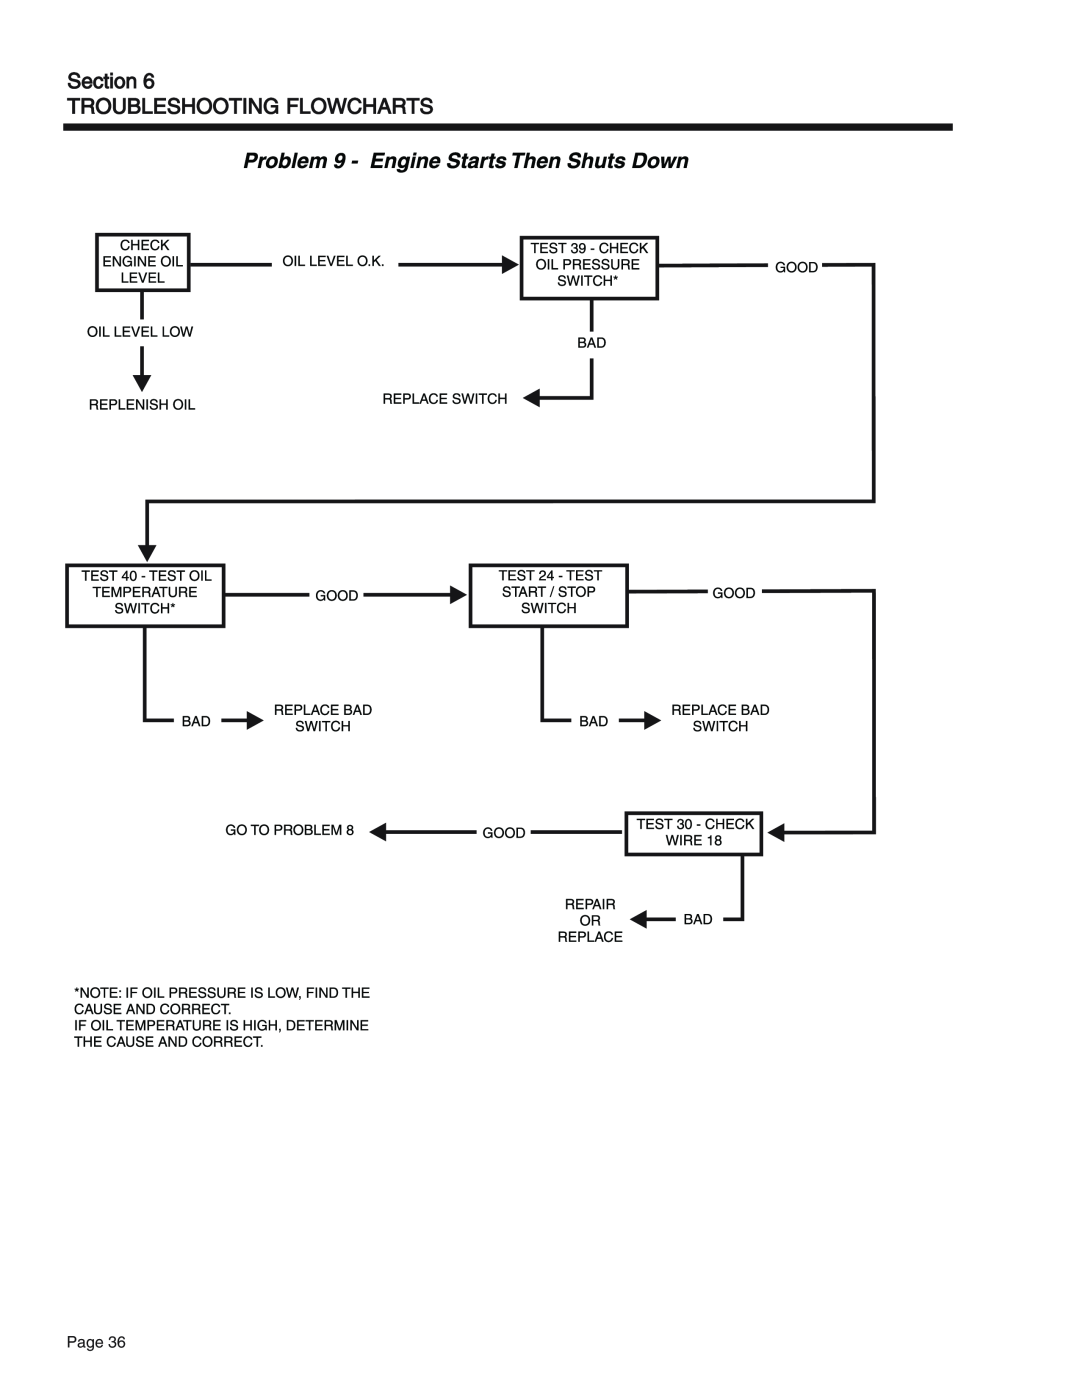 Generac Power Systems 65, 55, 75 manual Section TROUBLESHOOTING FLOWCHARTS, Page 